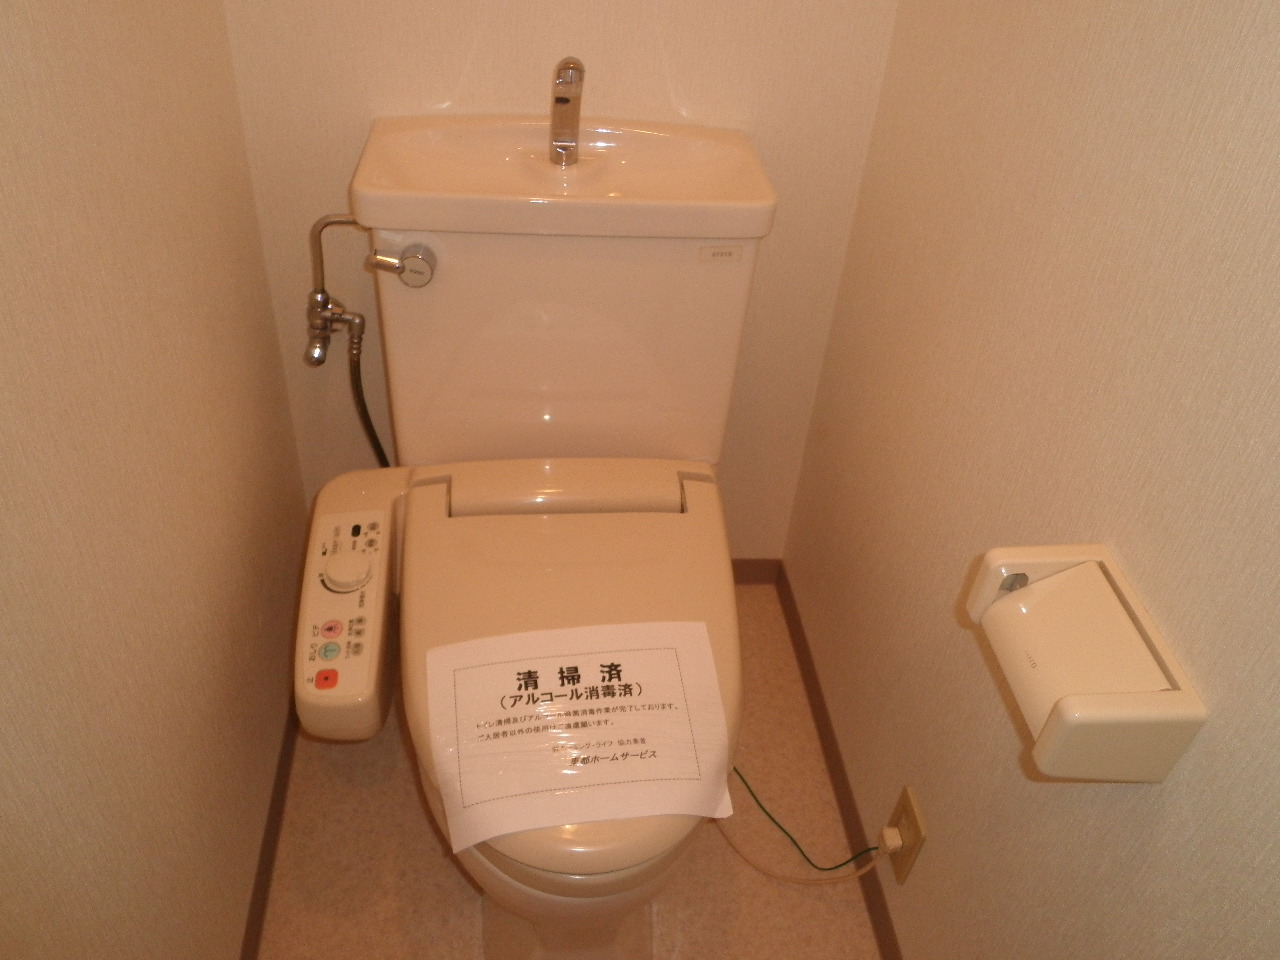 Toilet. Toilet is with a bidet. There is also storage shelf at the top